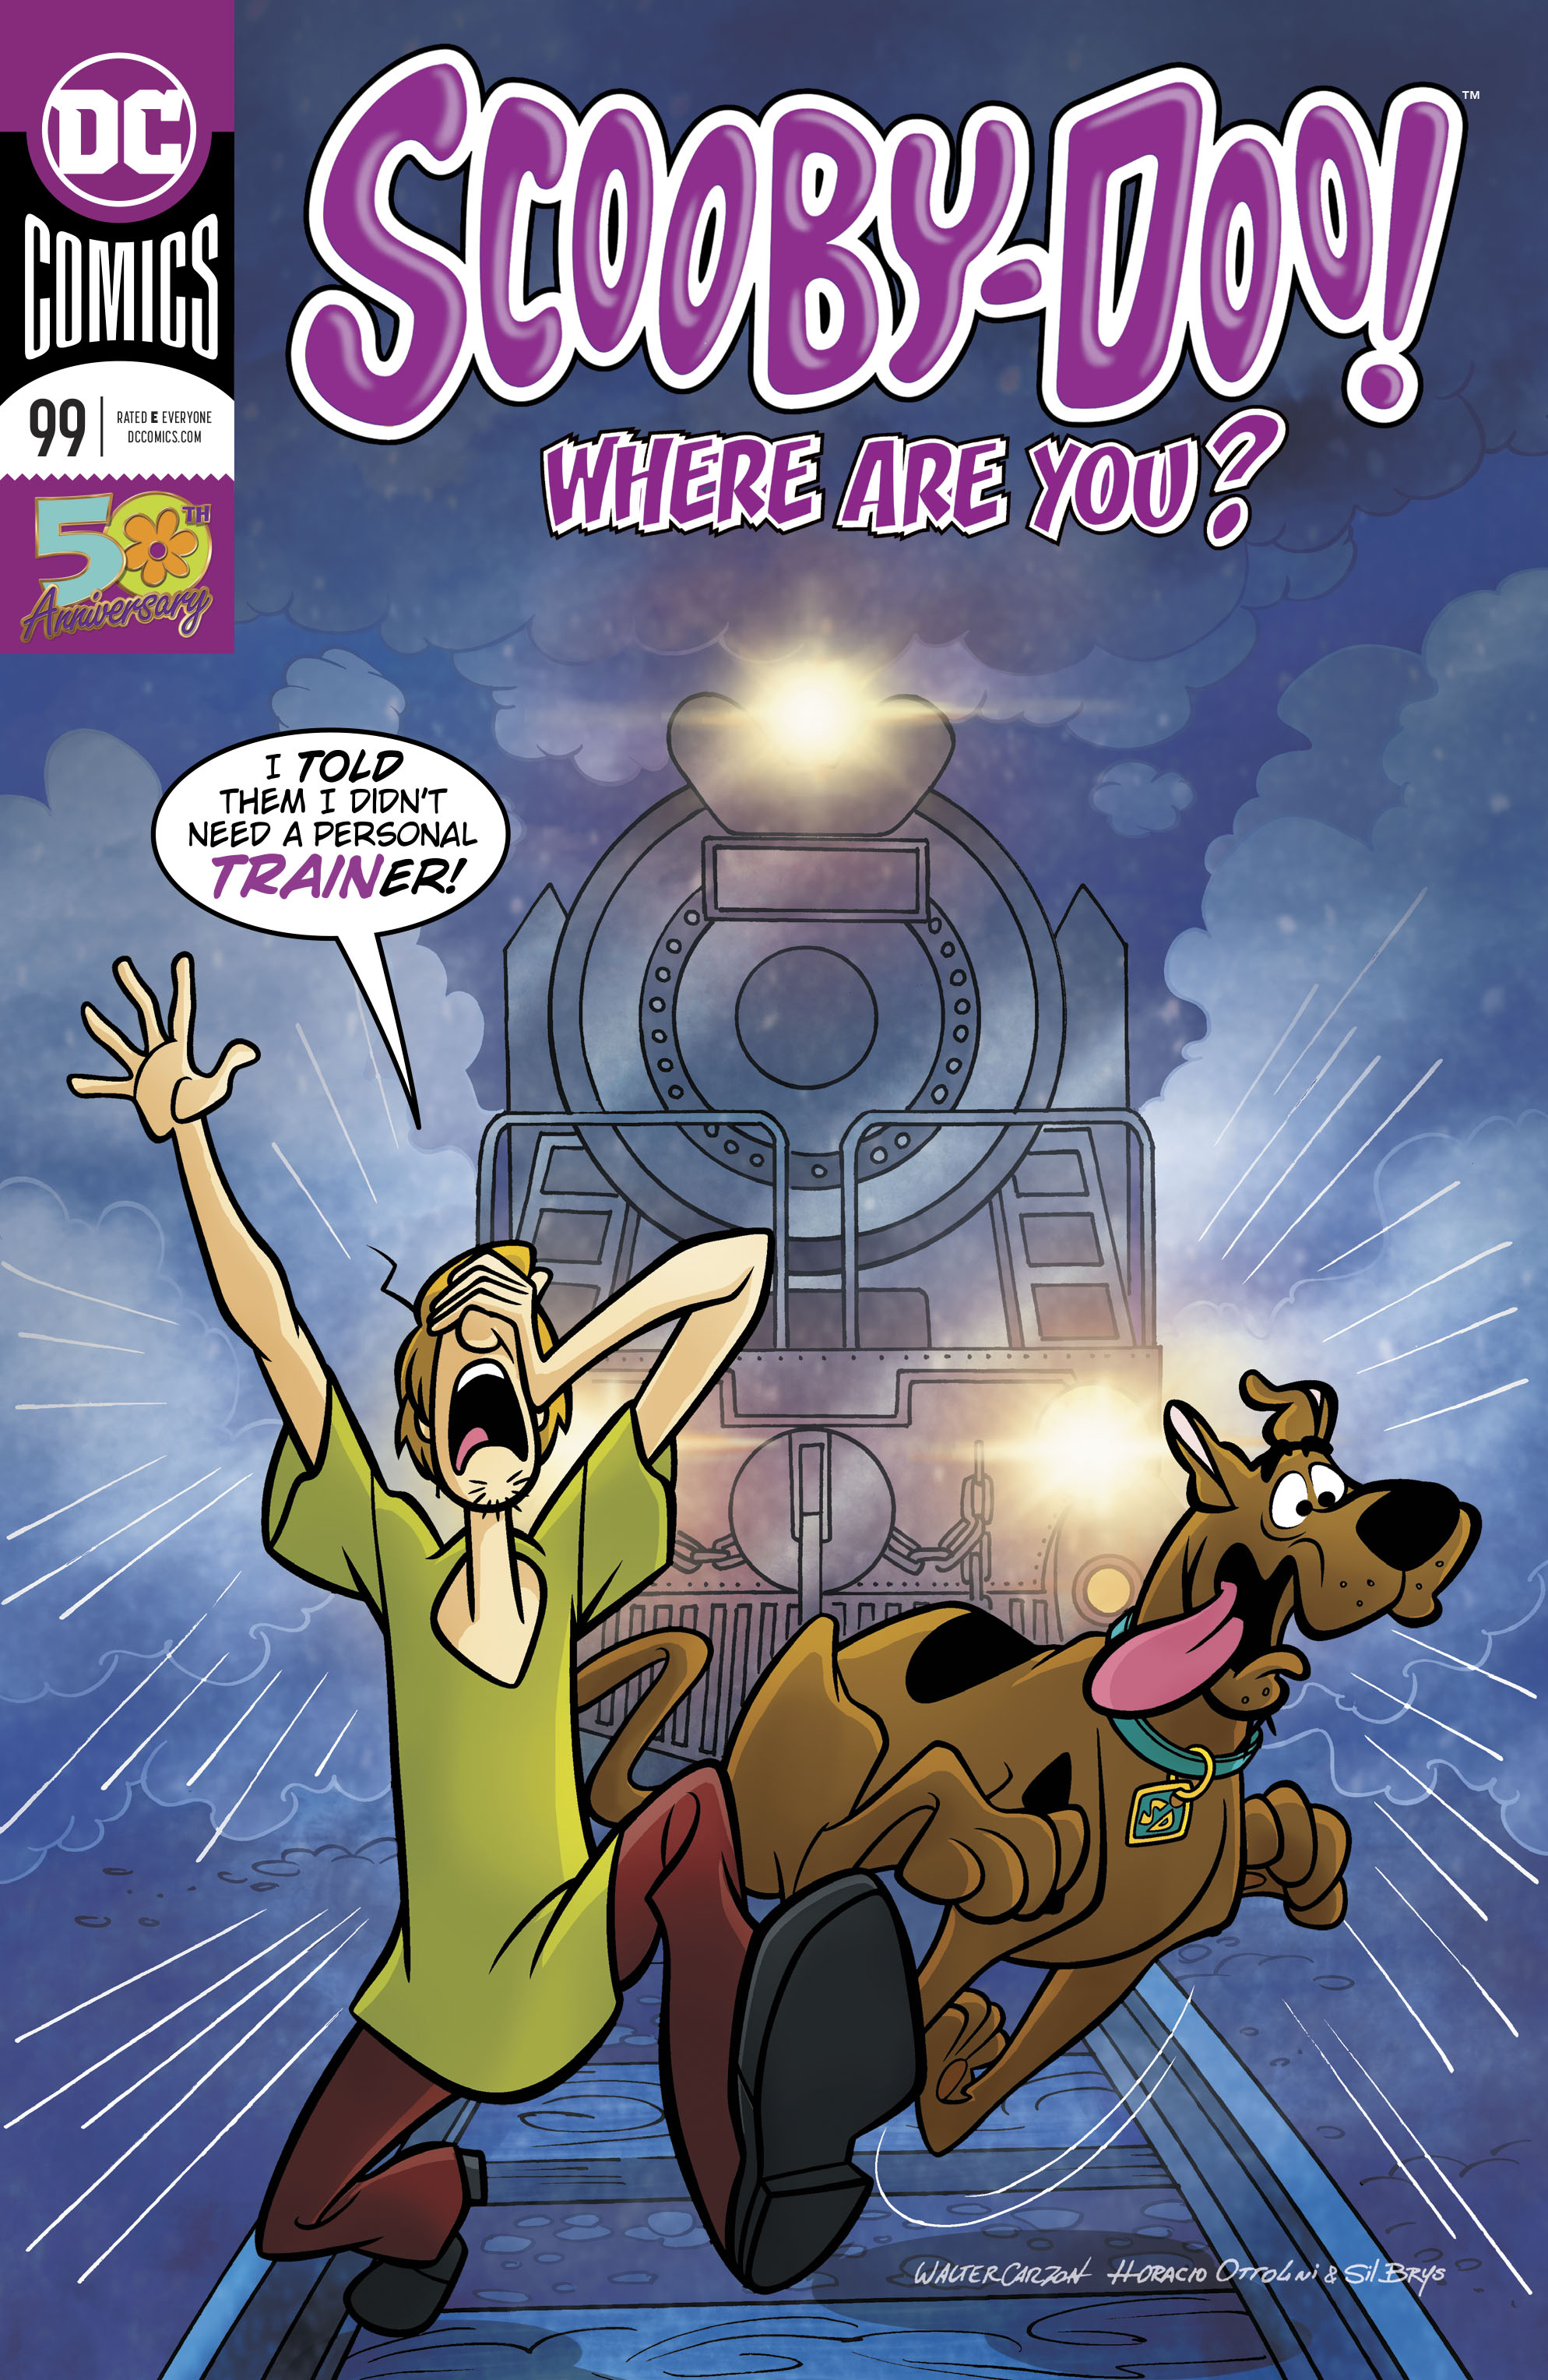 Read online Scooby-Doo: Where Are You? comic -  Issue #99 - 1